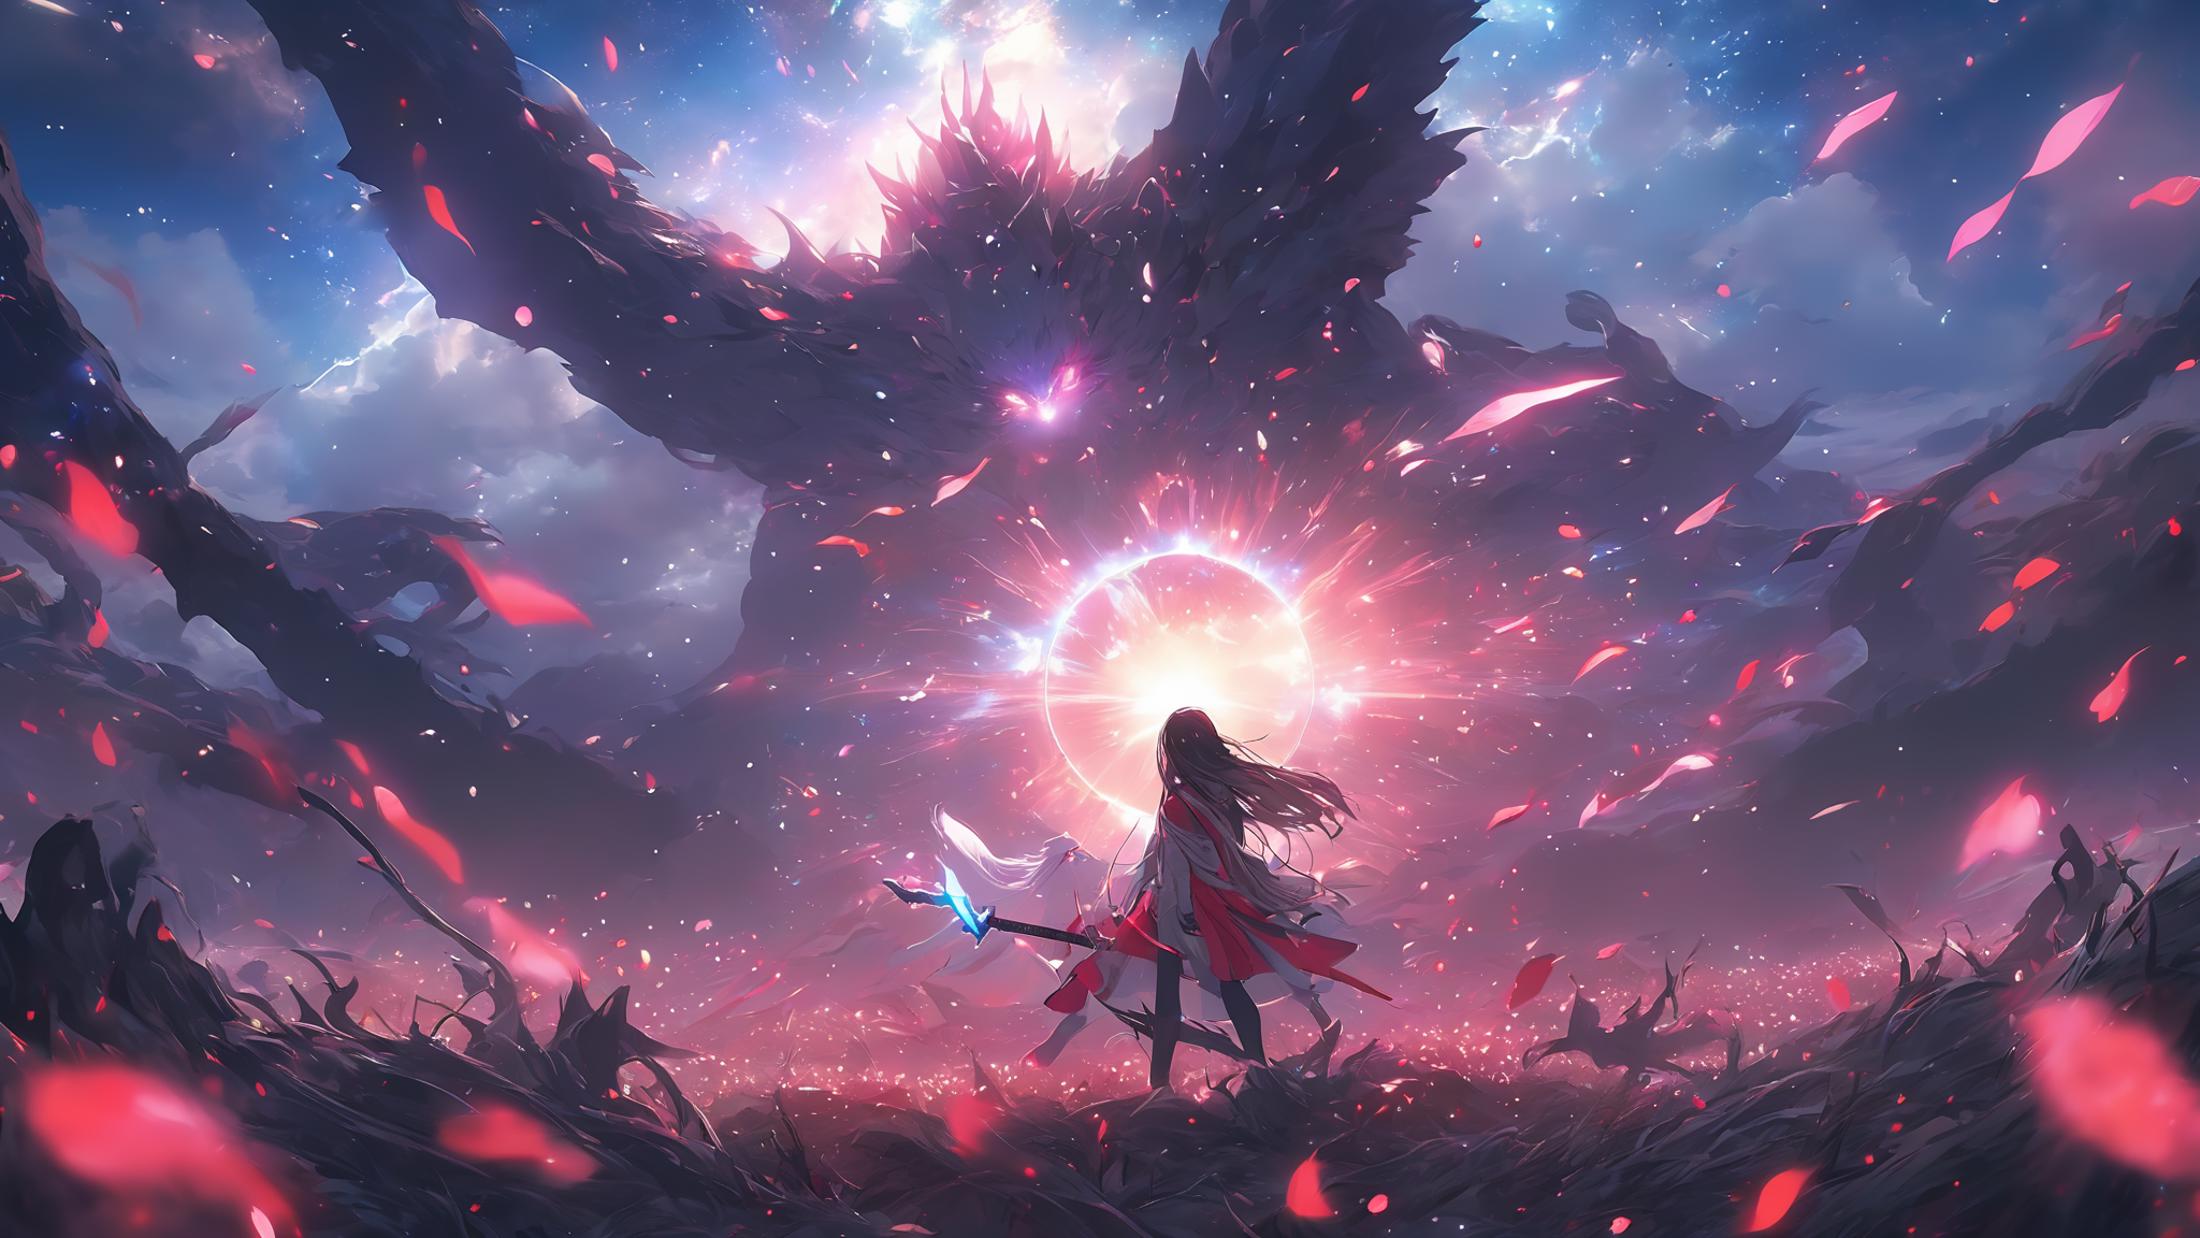 A woman holding a sword in front of a fiery sun and a giant beast.